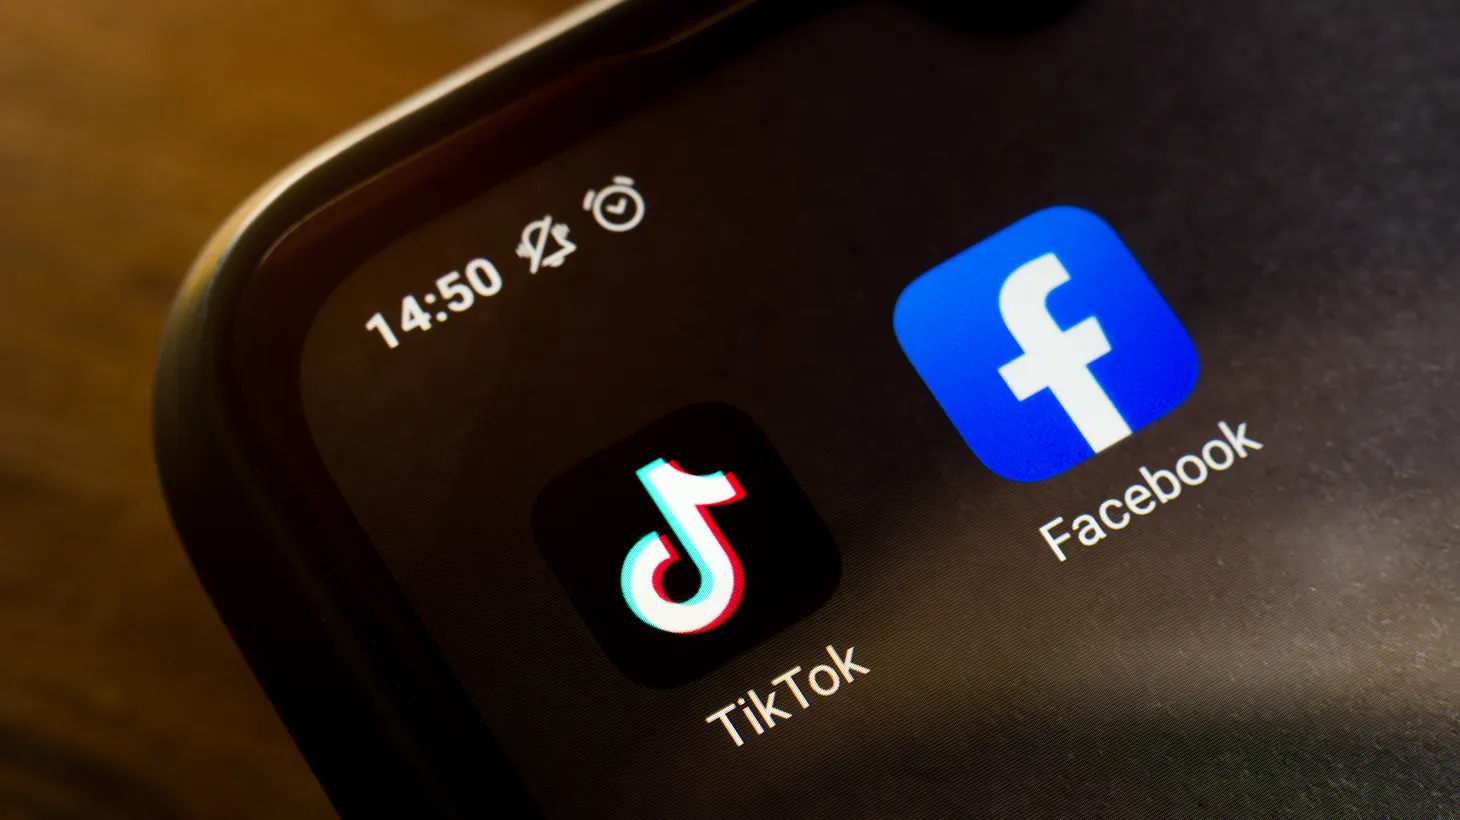 Meta, which owns Facebook, is a big rival to TikTok. It hired a GOP consulting firm called Targeted Victory to help spread negative stories about TikTok.